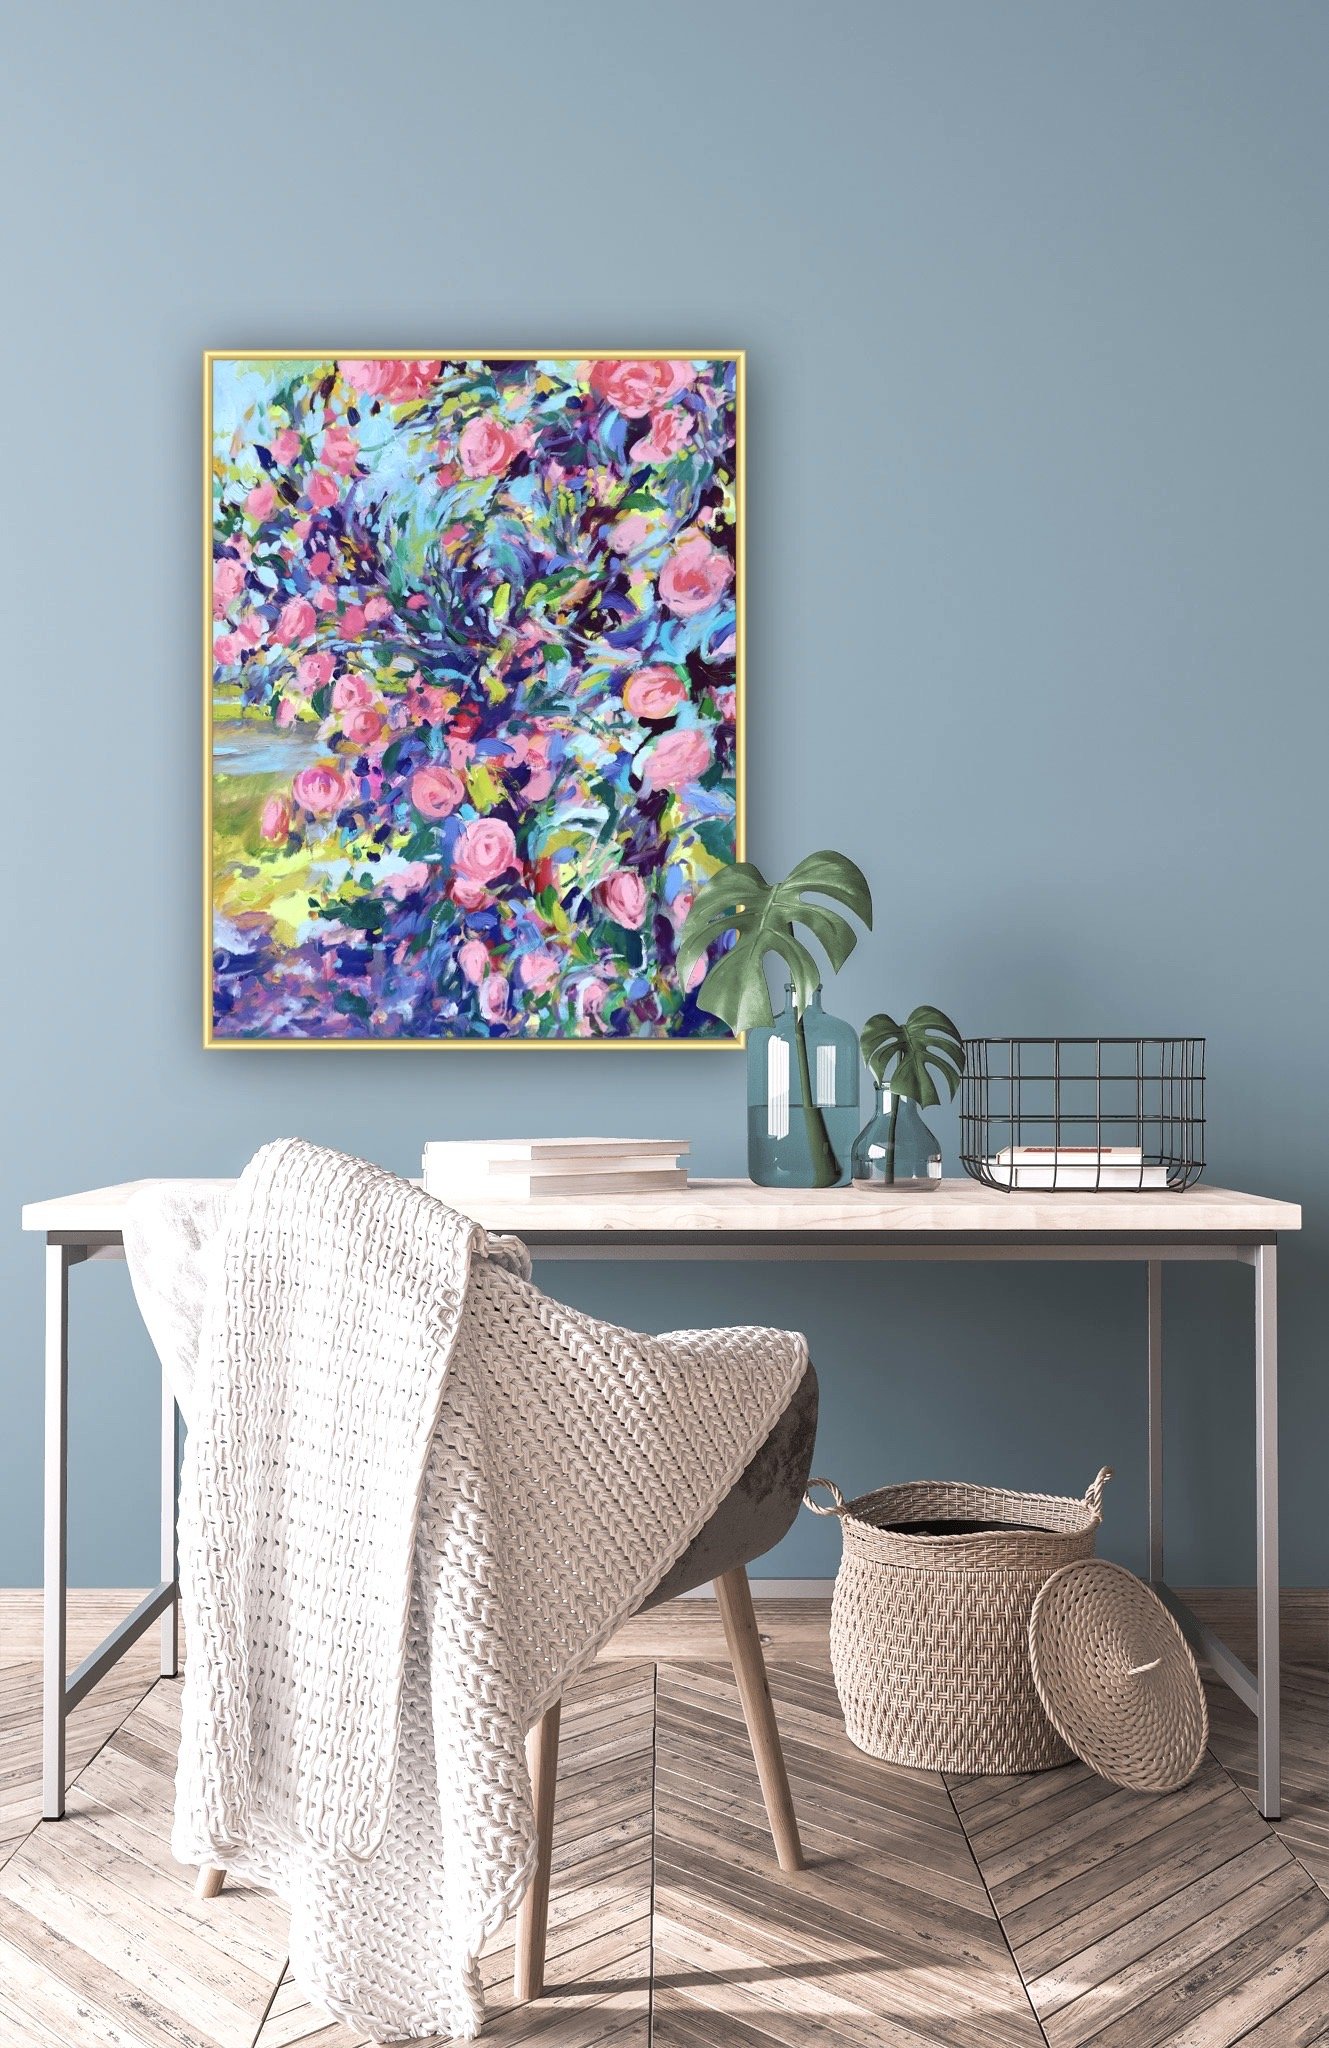 InCelebrationoftheLateBloomers-in-blue-KatiePodracky-original-oil-painting-abstract-floral-camellias.JPG